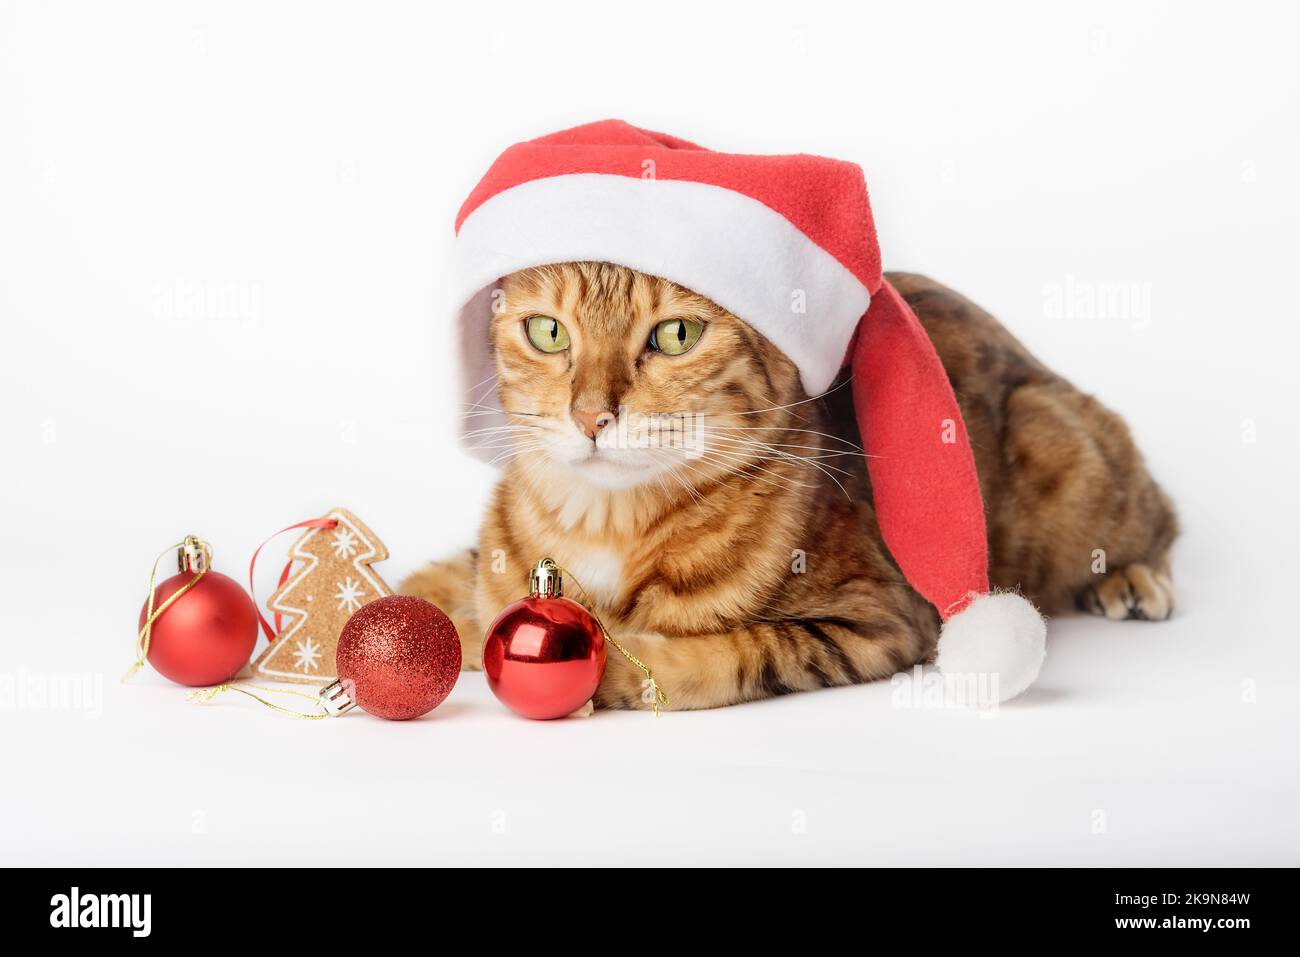 Ginger cat in Santa hat and Christmas decorations isolated on background. Christmas and New Year concept. Stock Photo